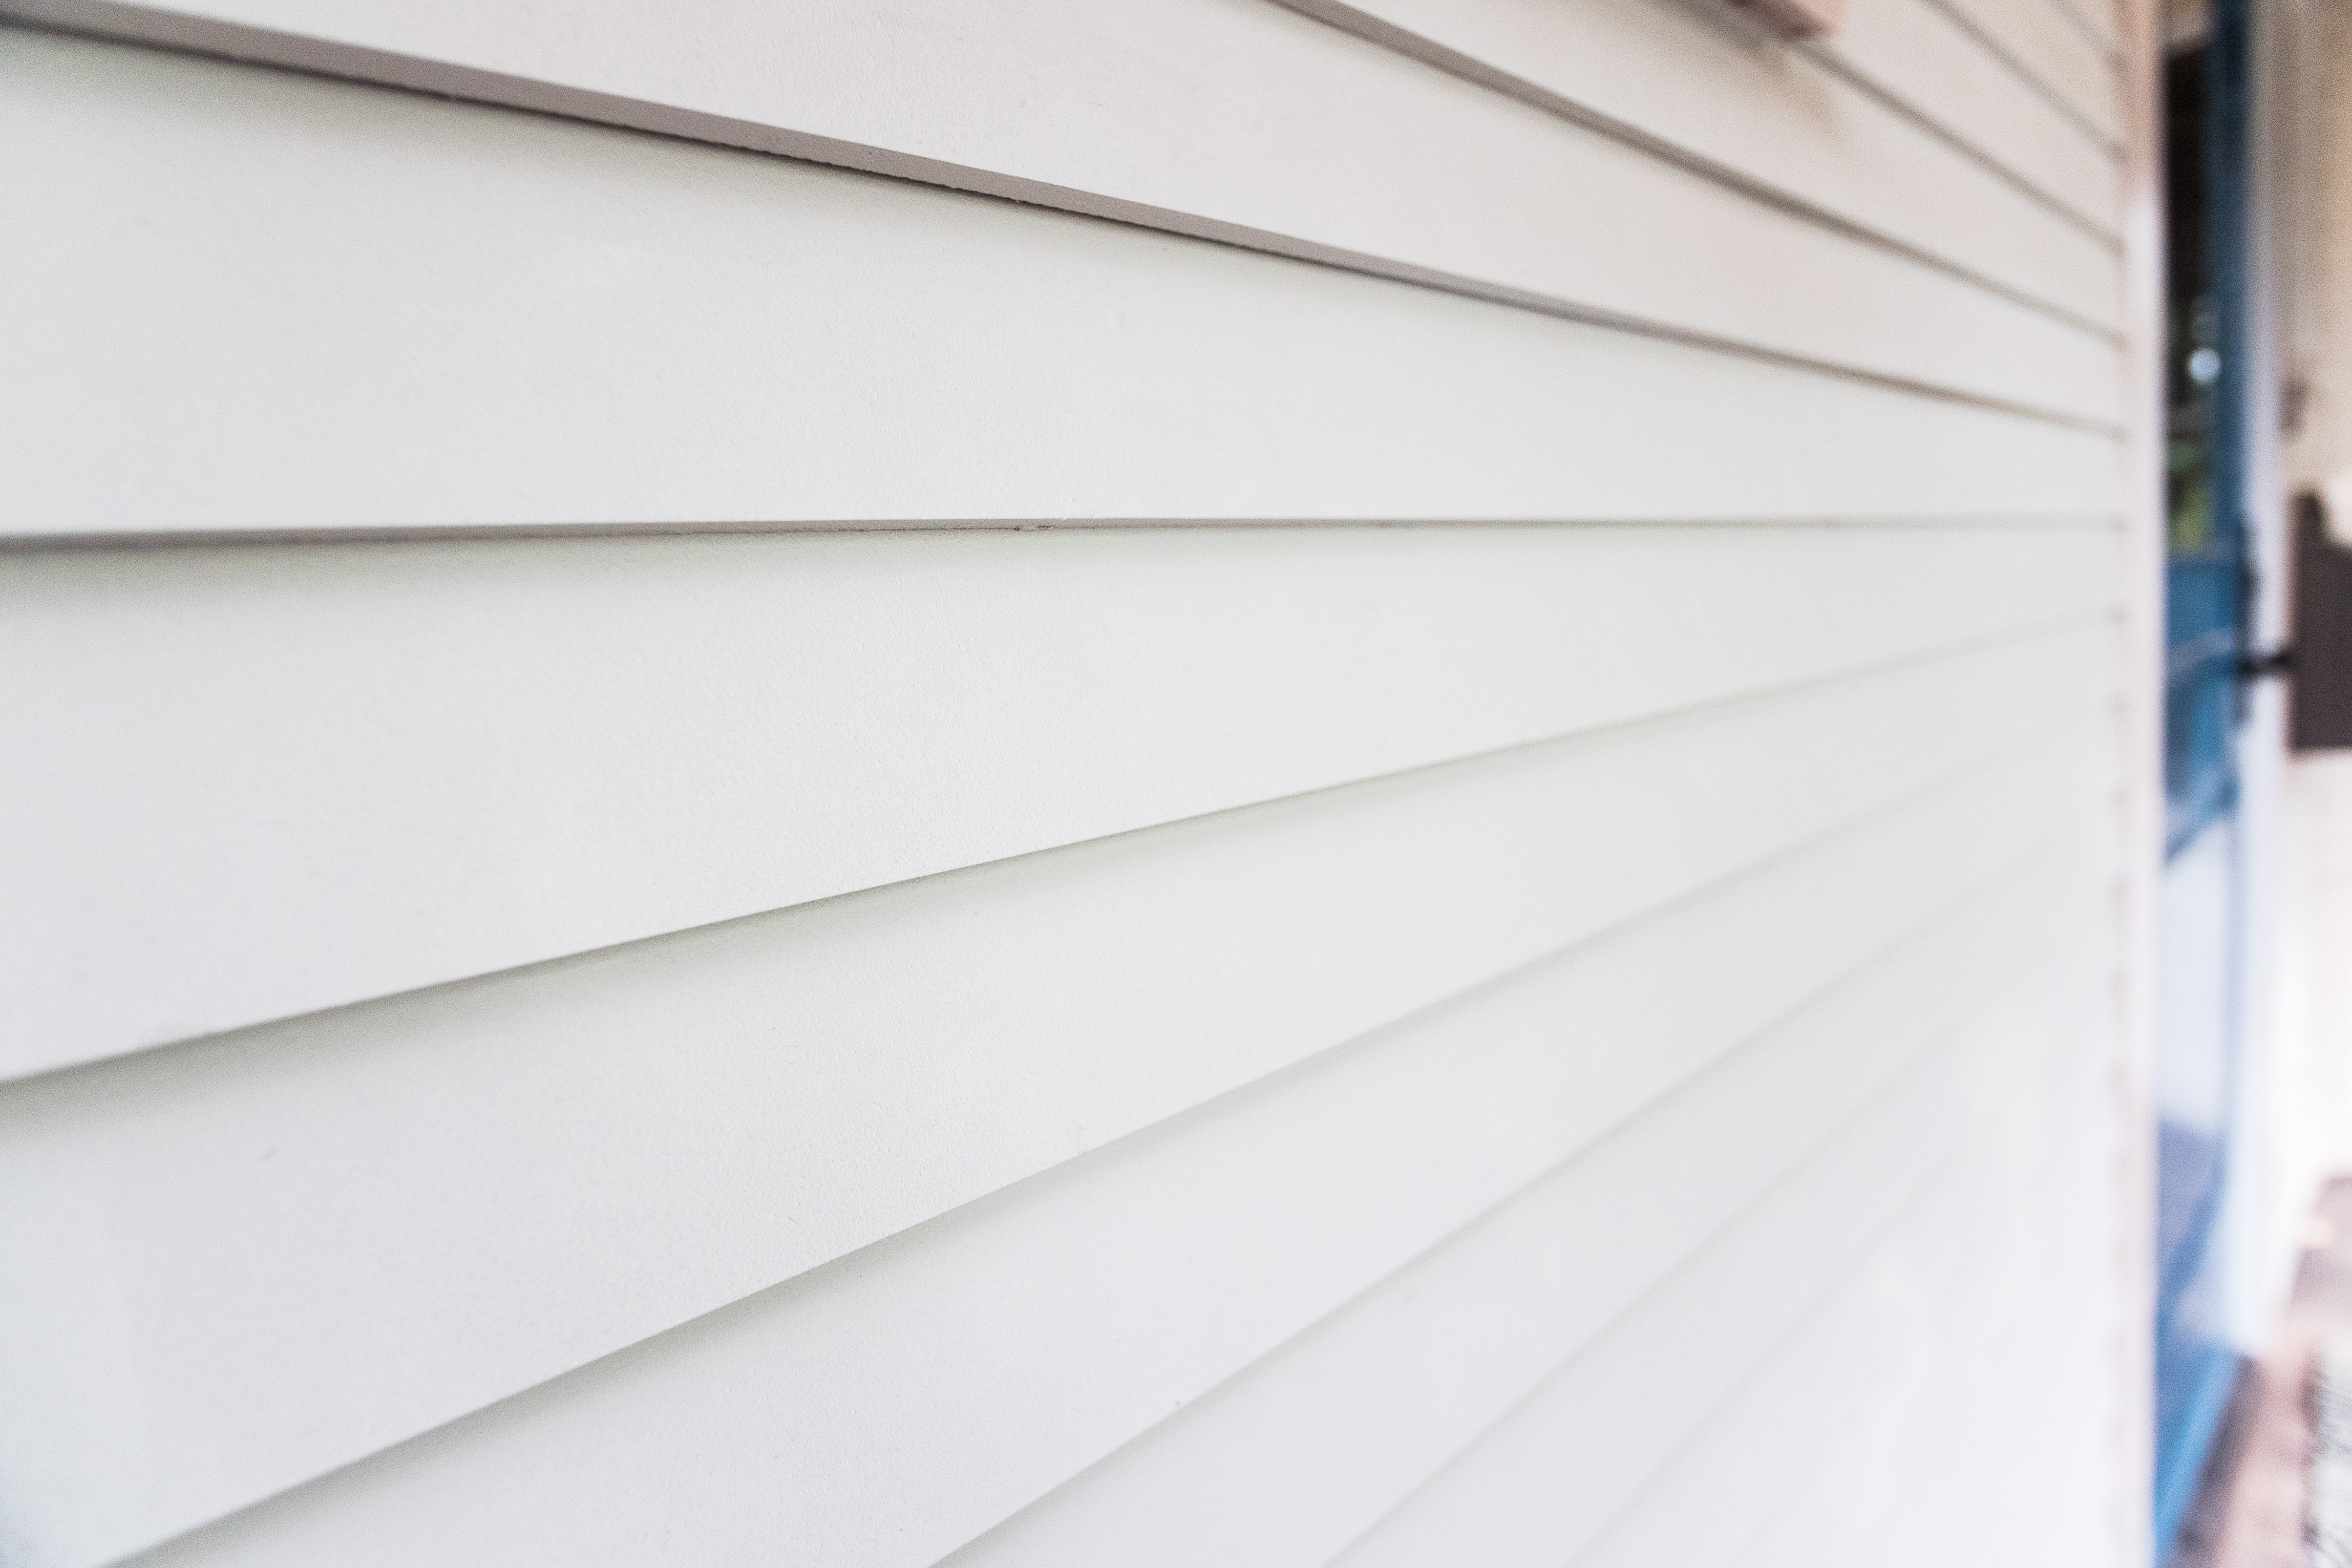 lp smartside lap siding - 7 trendy and functional siding styles